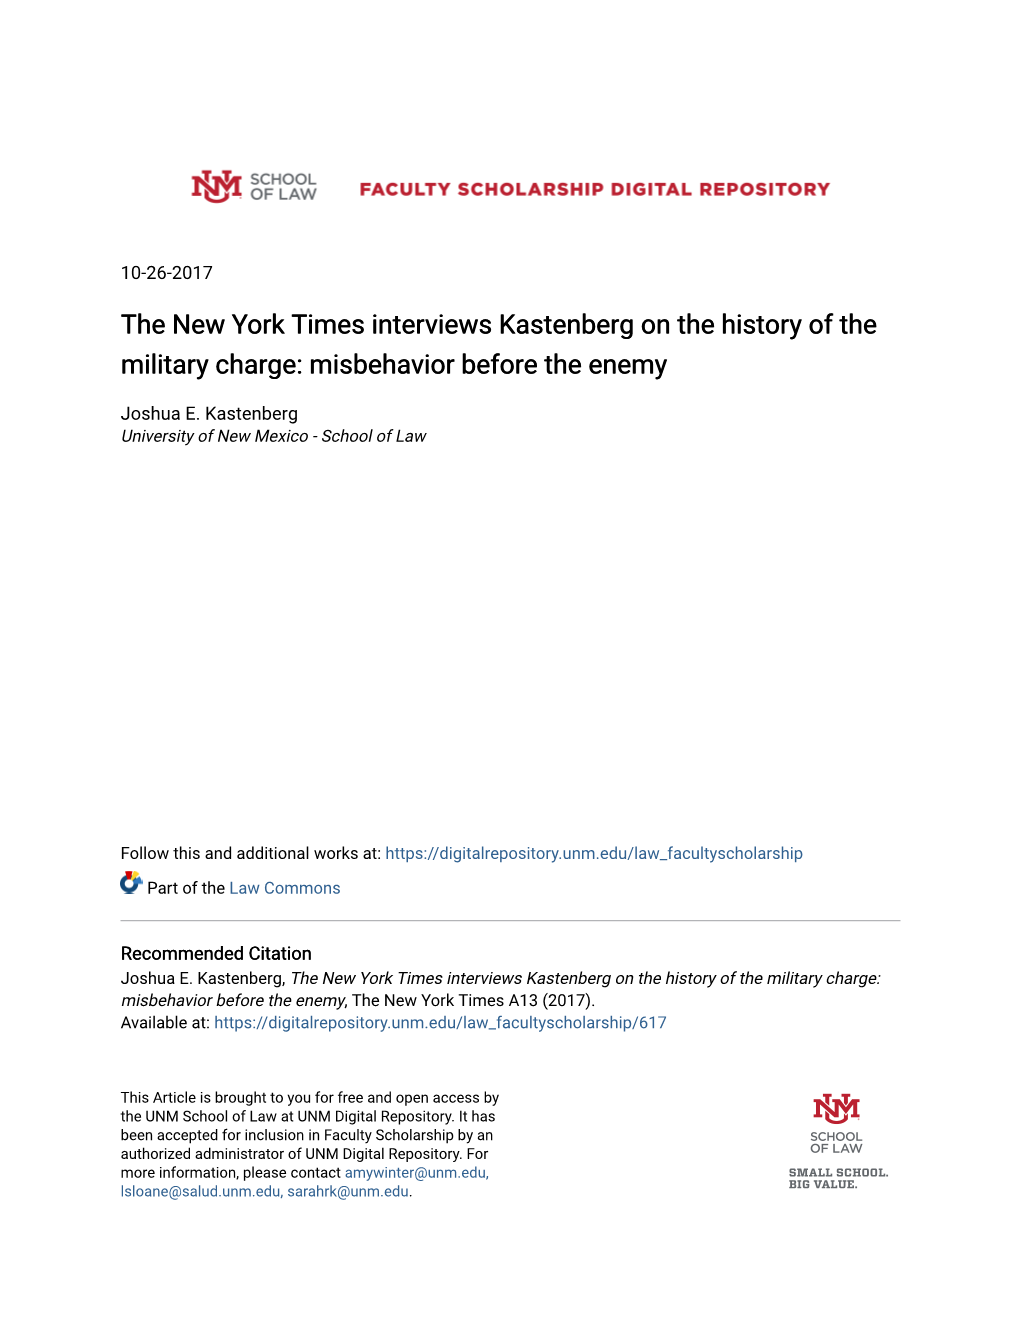 The New York Times Interviews Kastenberg on the History of the Military Charge: Misbehavior Before the Enemy